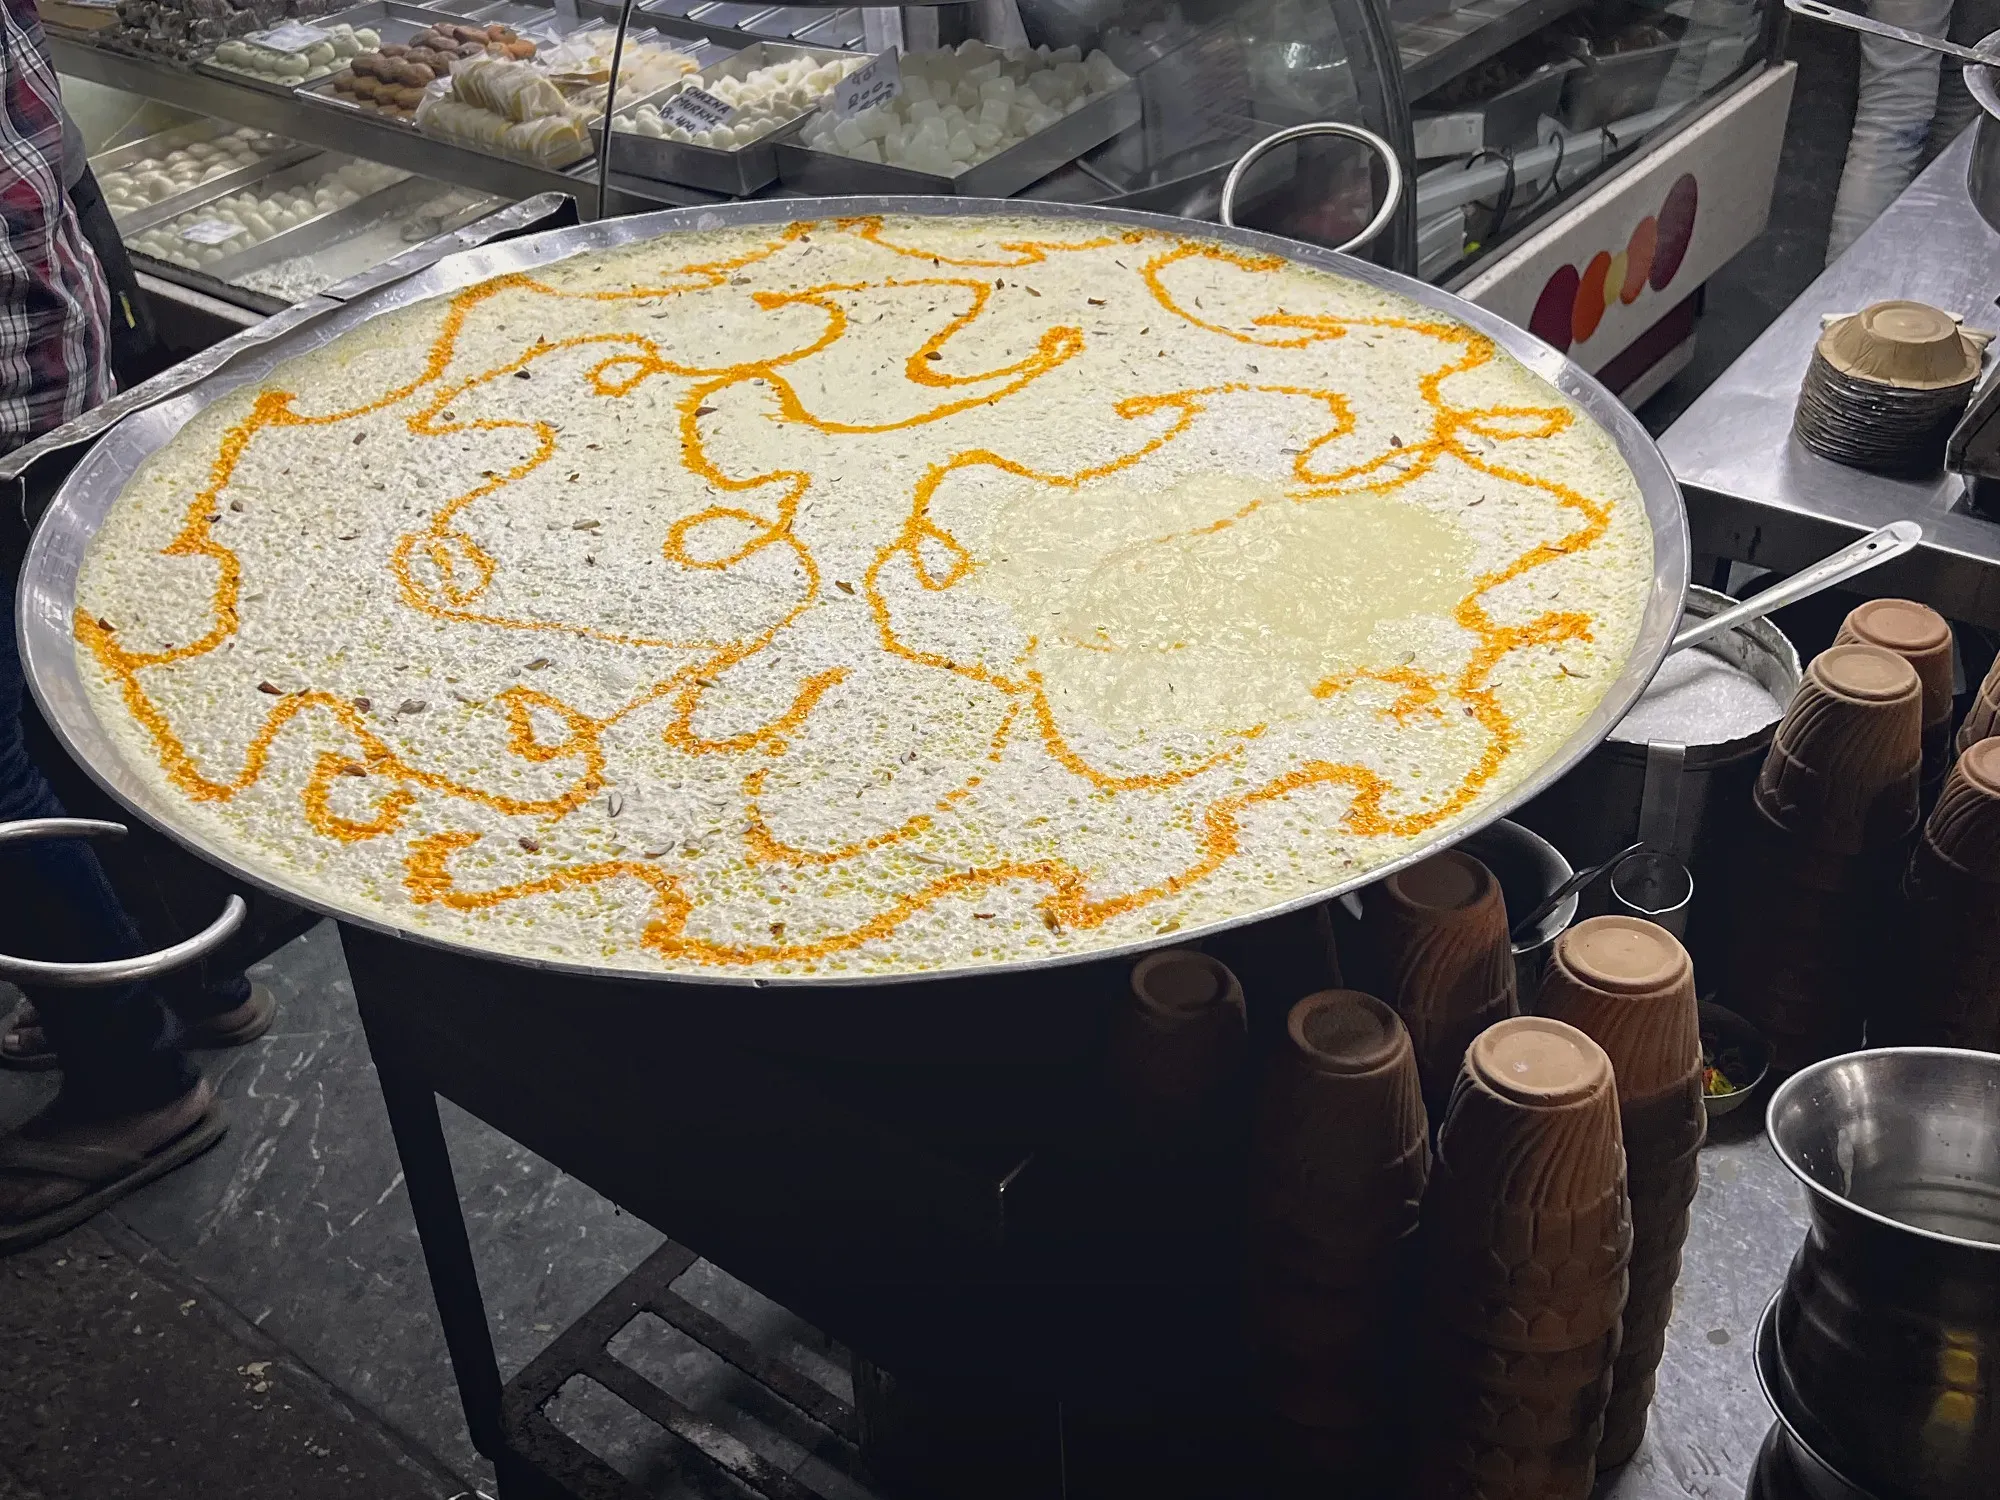 Huge pot of Kheer in the street outside a sweet shop in India with a stack of small clap cups for serving.